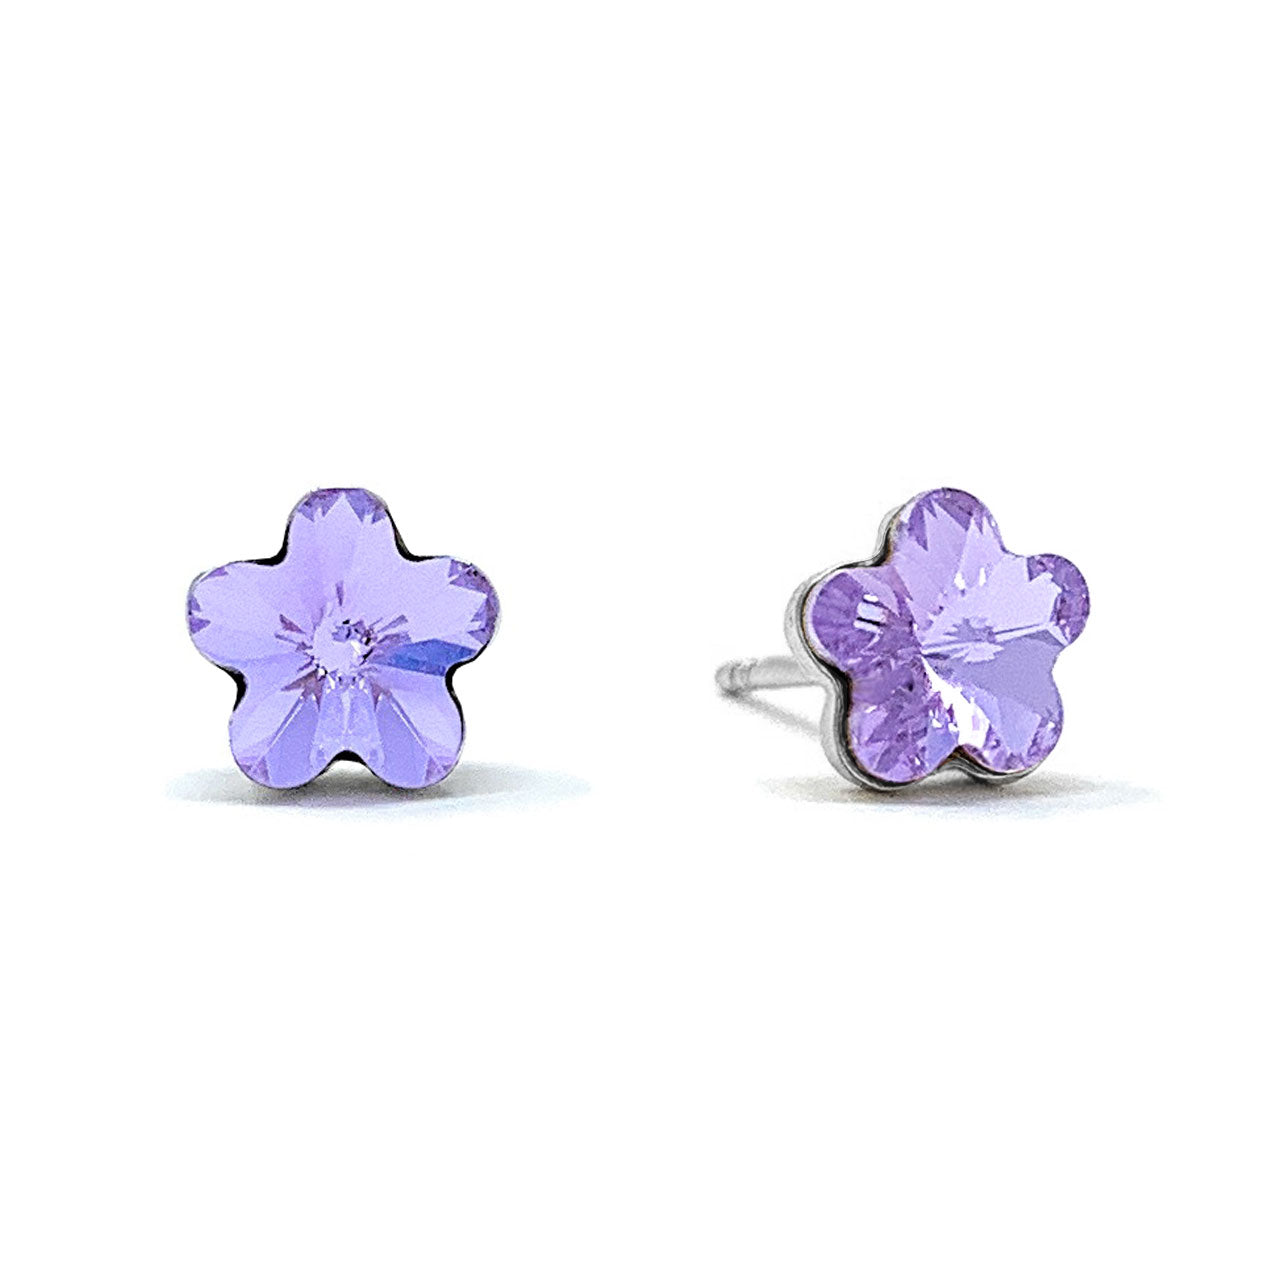 Anna Small Stud Earrings with Purple Violet Flower Crystals from Swarovski Silver Toned Rhodium Plated - Ed Heart